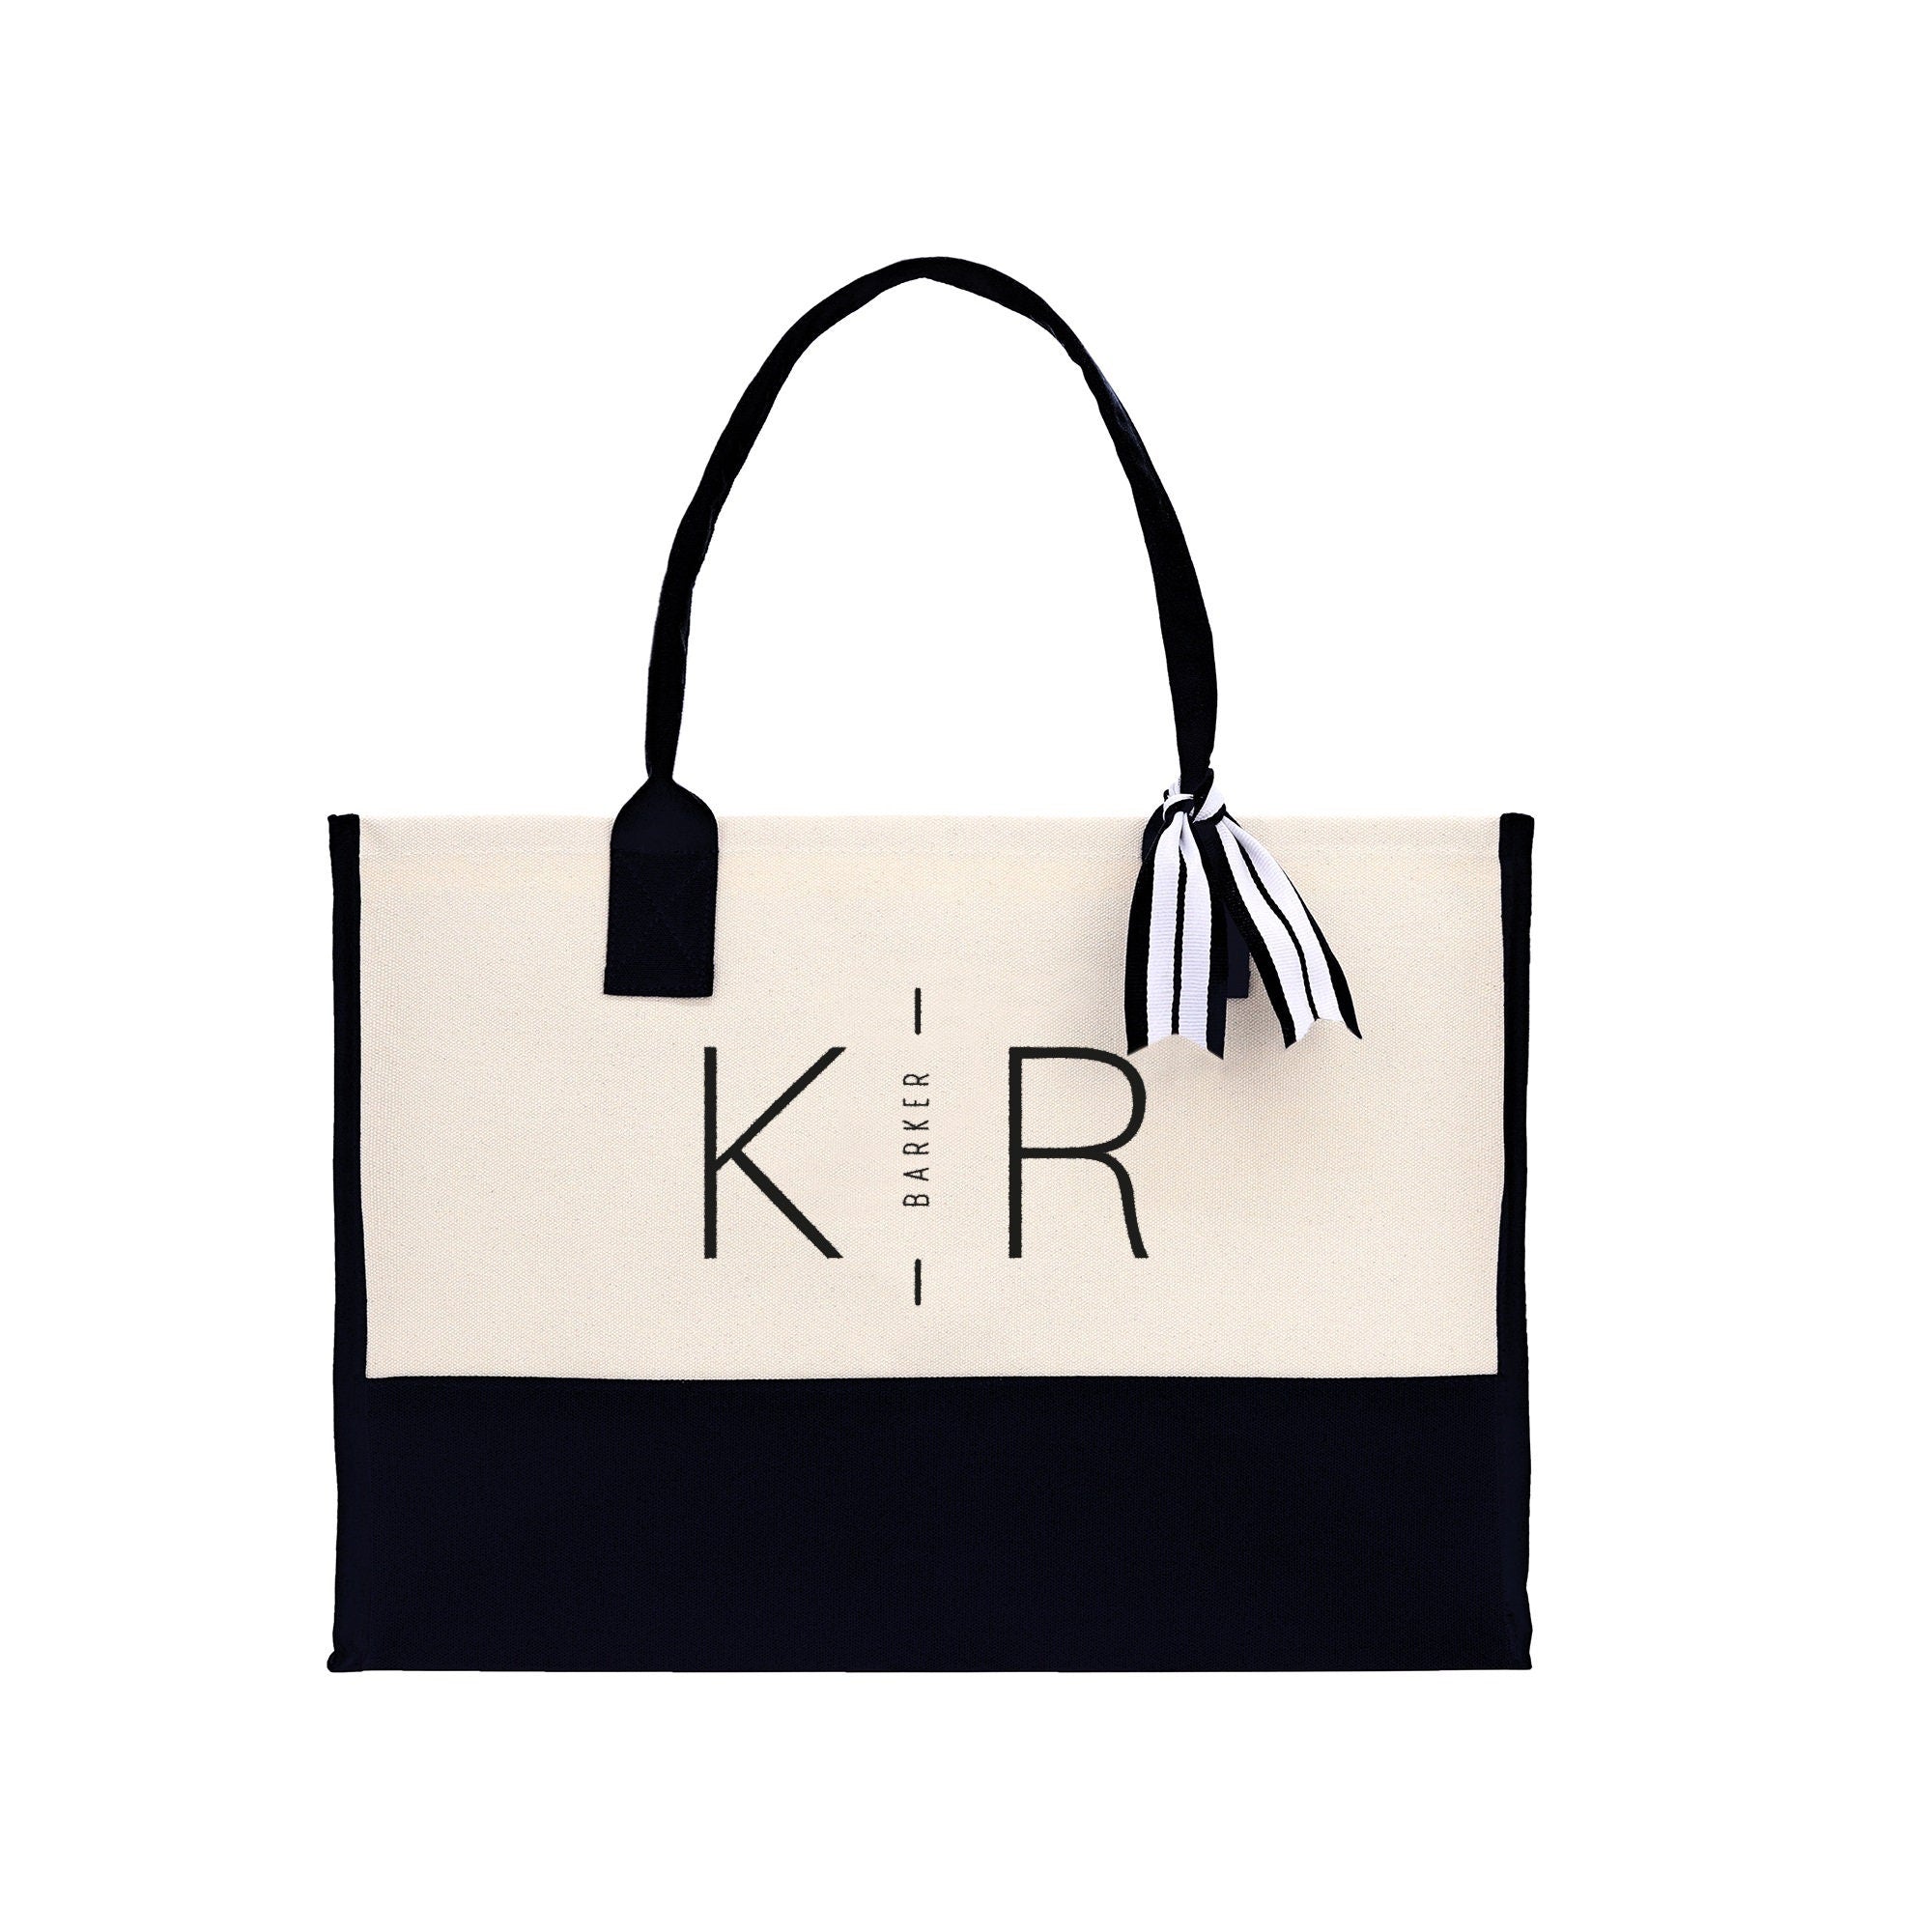 Embroidered Monogram Tote Bags